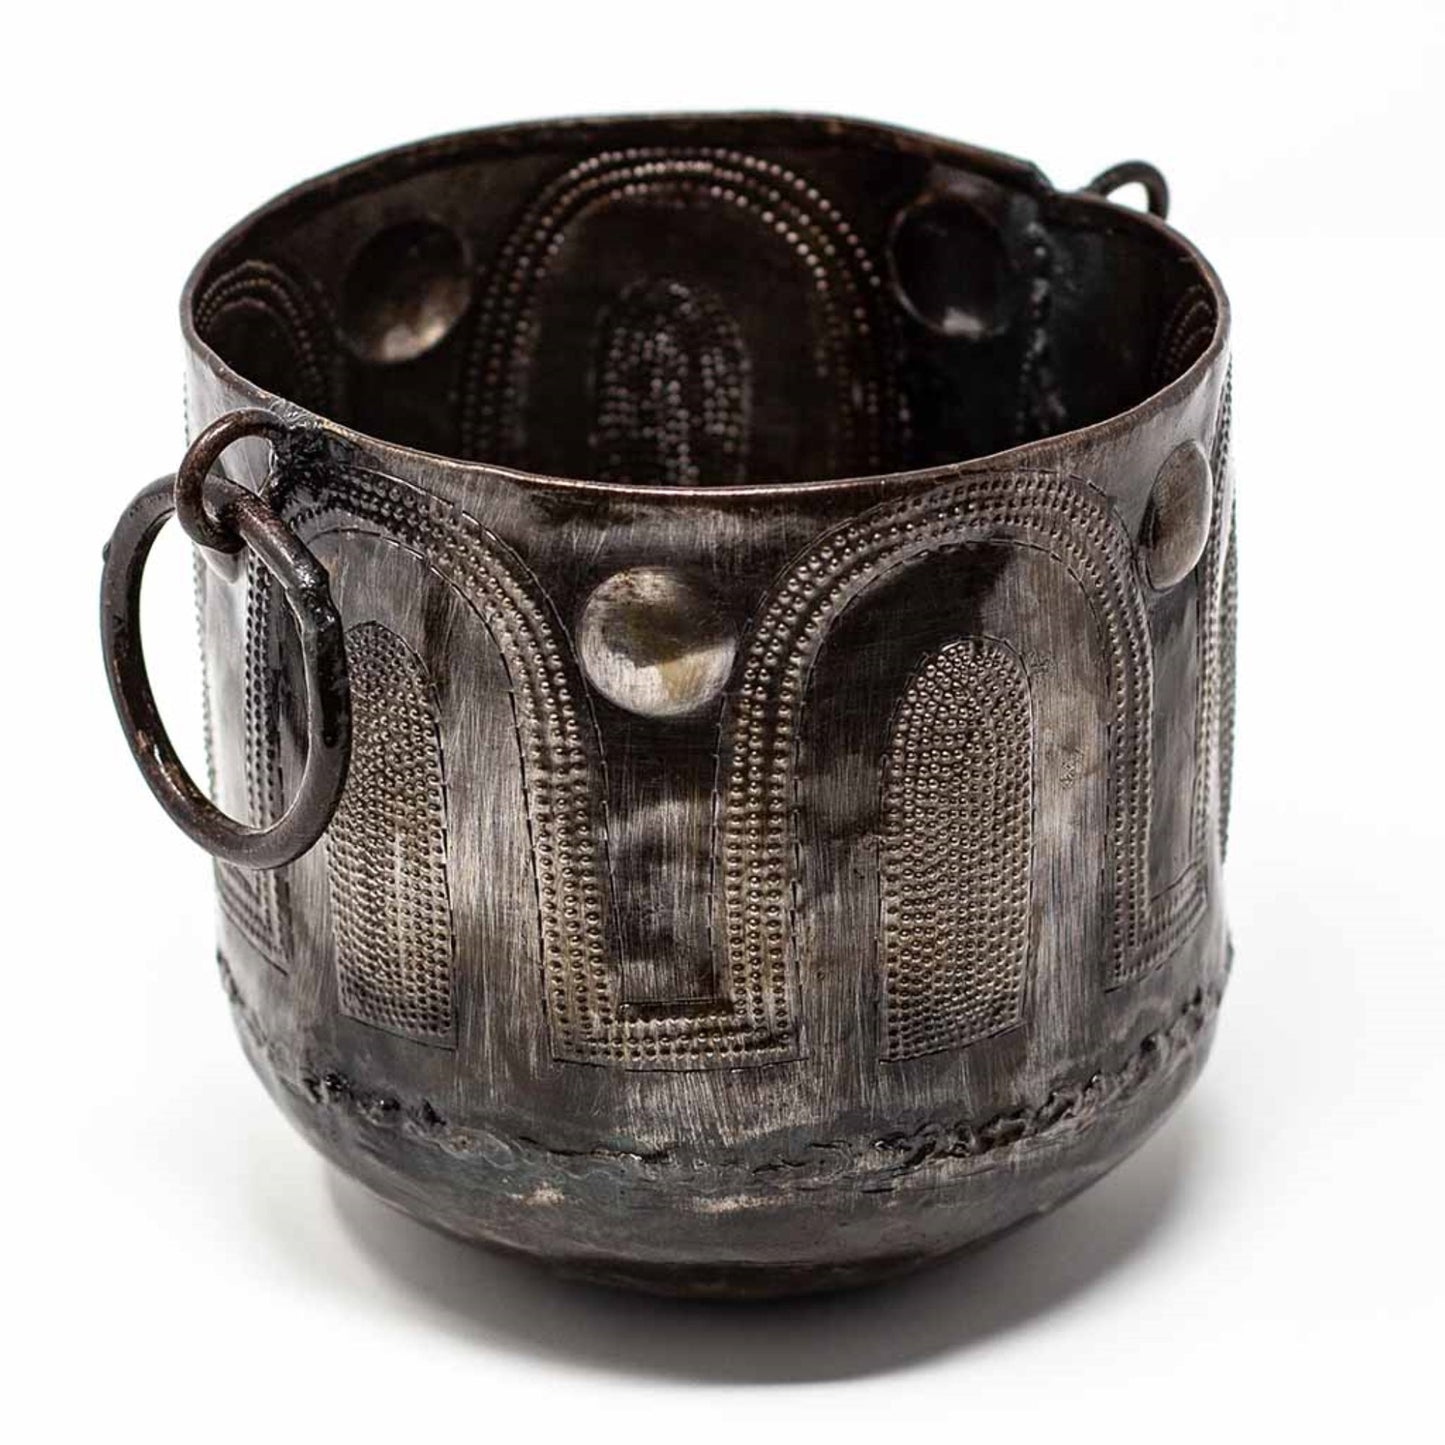 hammered-metal-container-with-round-handles-croix-des-bouquets